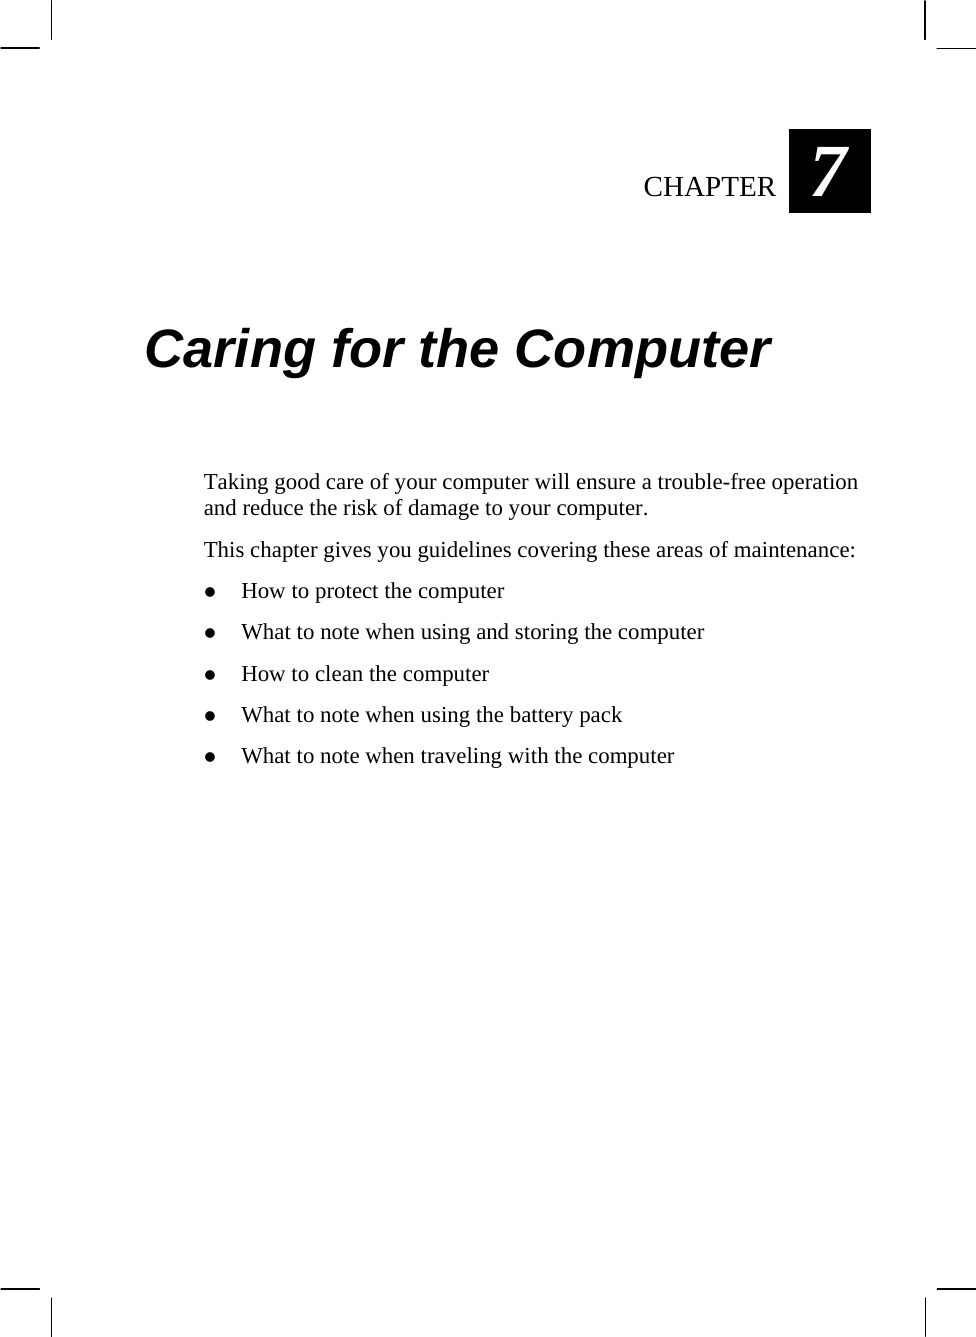  7CHAPTER   Caring for the Computer Taking good care of your computer will ensure a trouble-free operation and reduce the risk of damage to your computer. This chapter gives you guidelines covering these areas of maintenance: z How to protect the computer z What to note when using and storing the computer z How to clean the computer z What to note when using the battery pack z What to note when traveling with the computer  